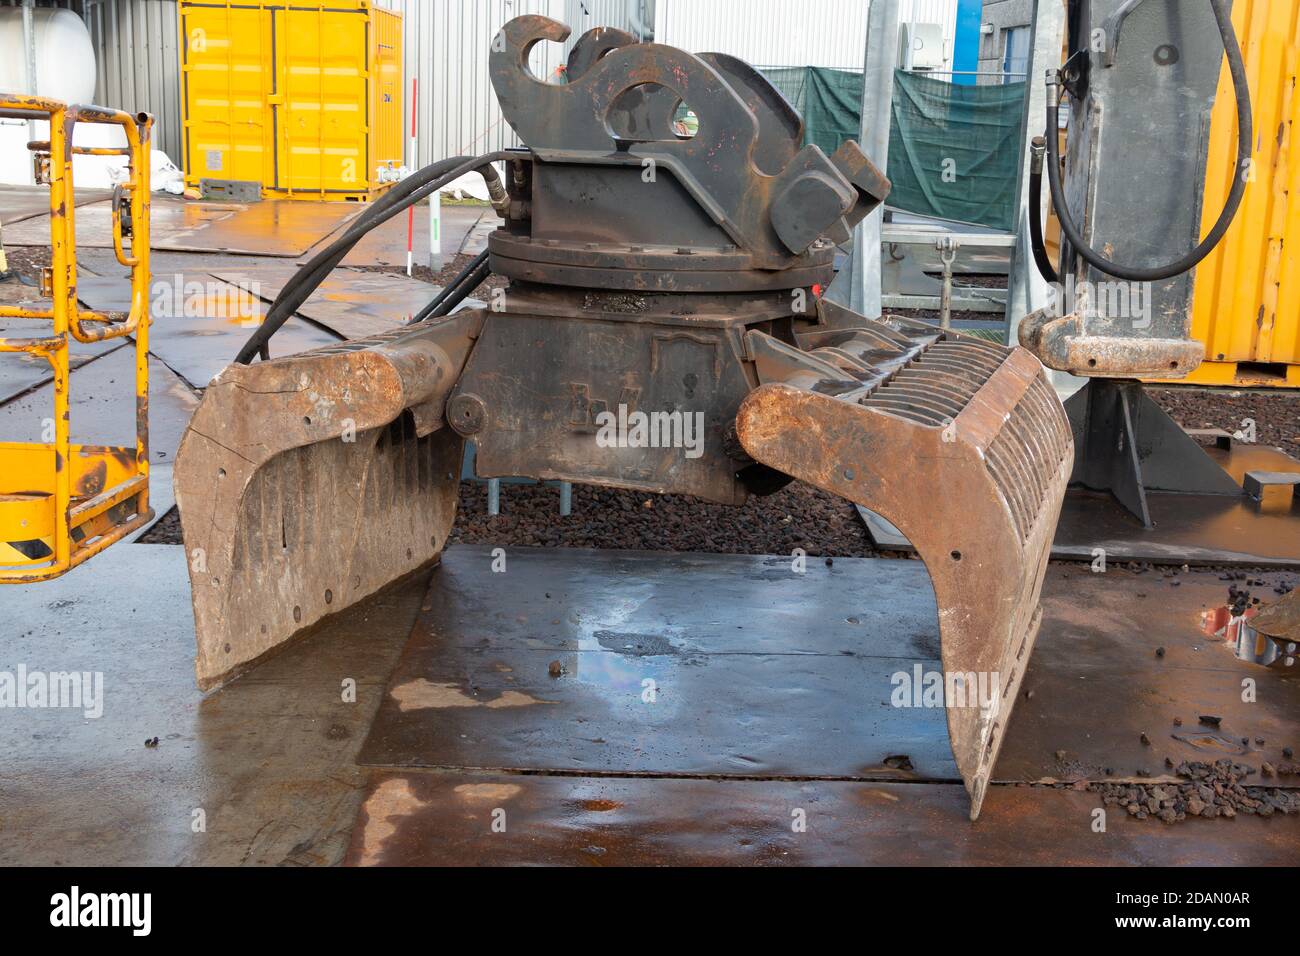 A grab or clamshell on a construction site ready for use on a excavator Stock Photo